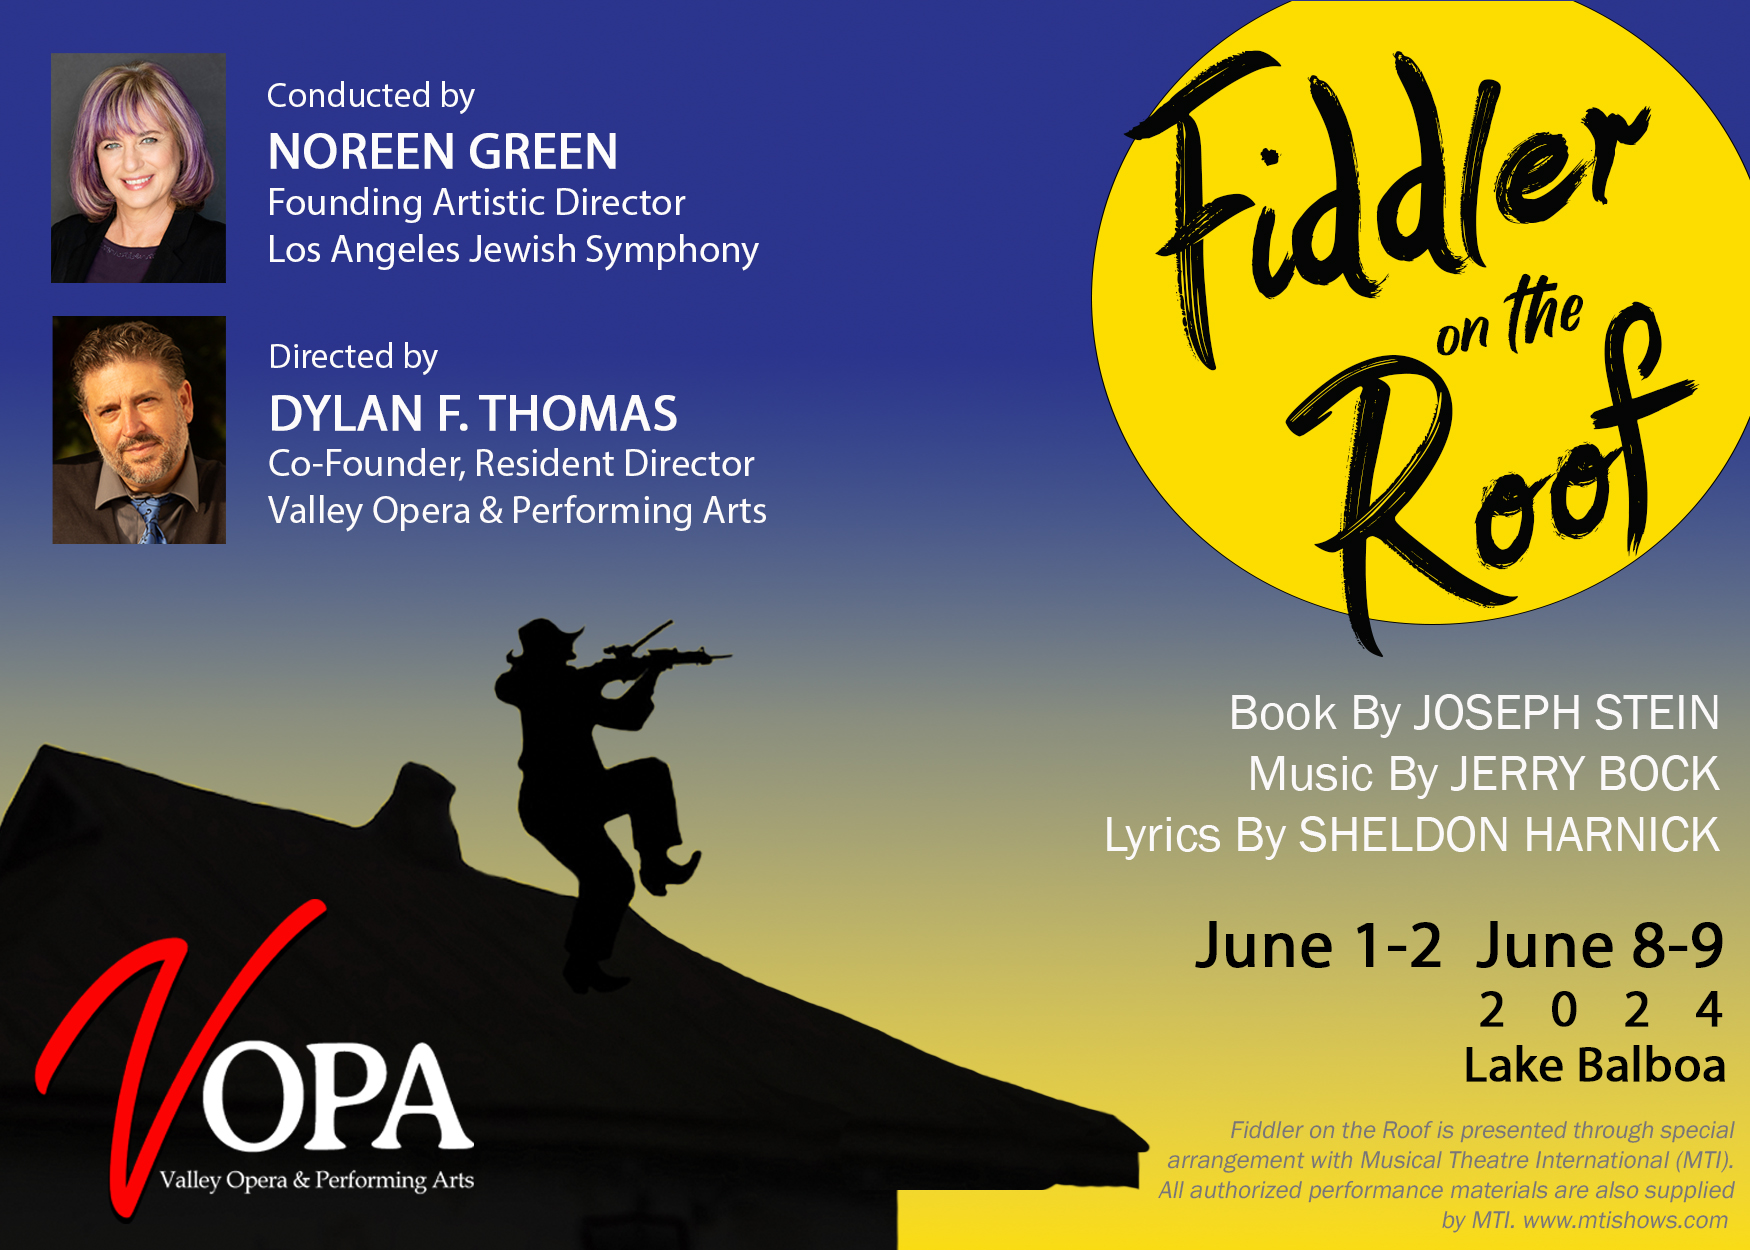 An infographic advertising Fiddler on the Roof, presented by VOPA and conducted by Noreen Green.